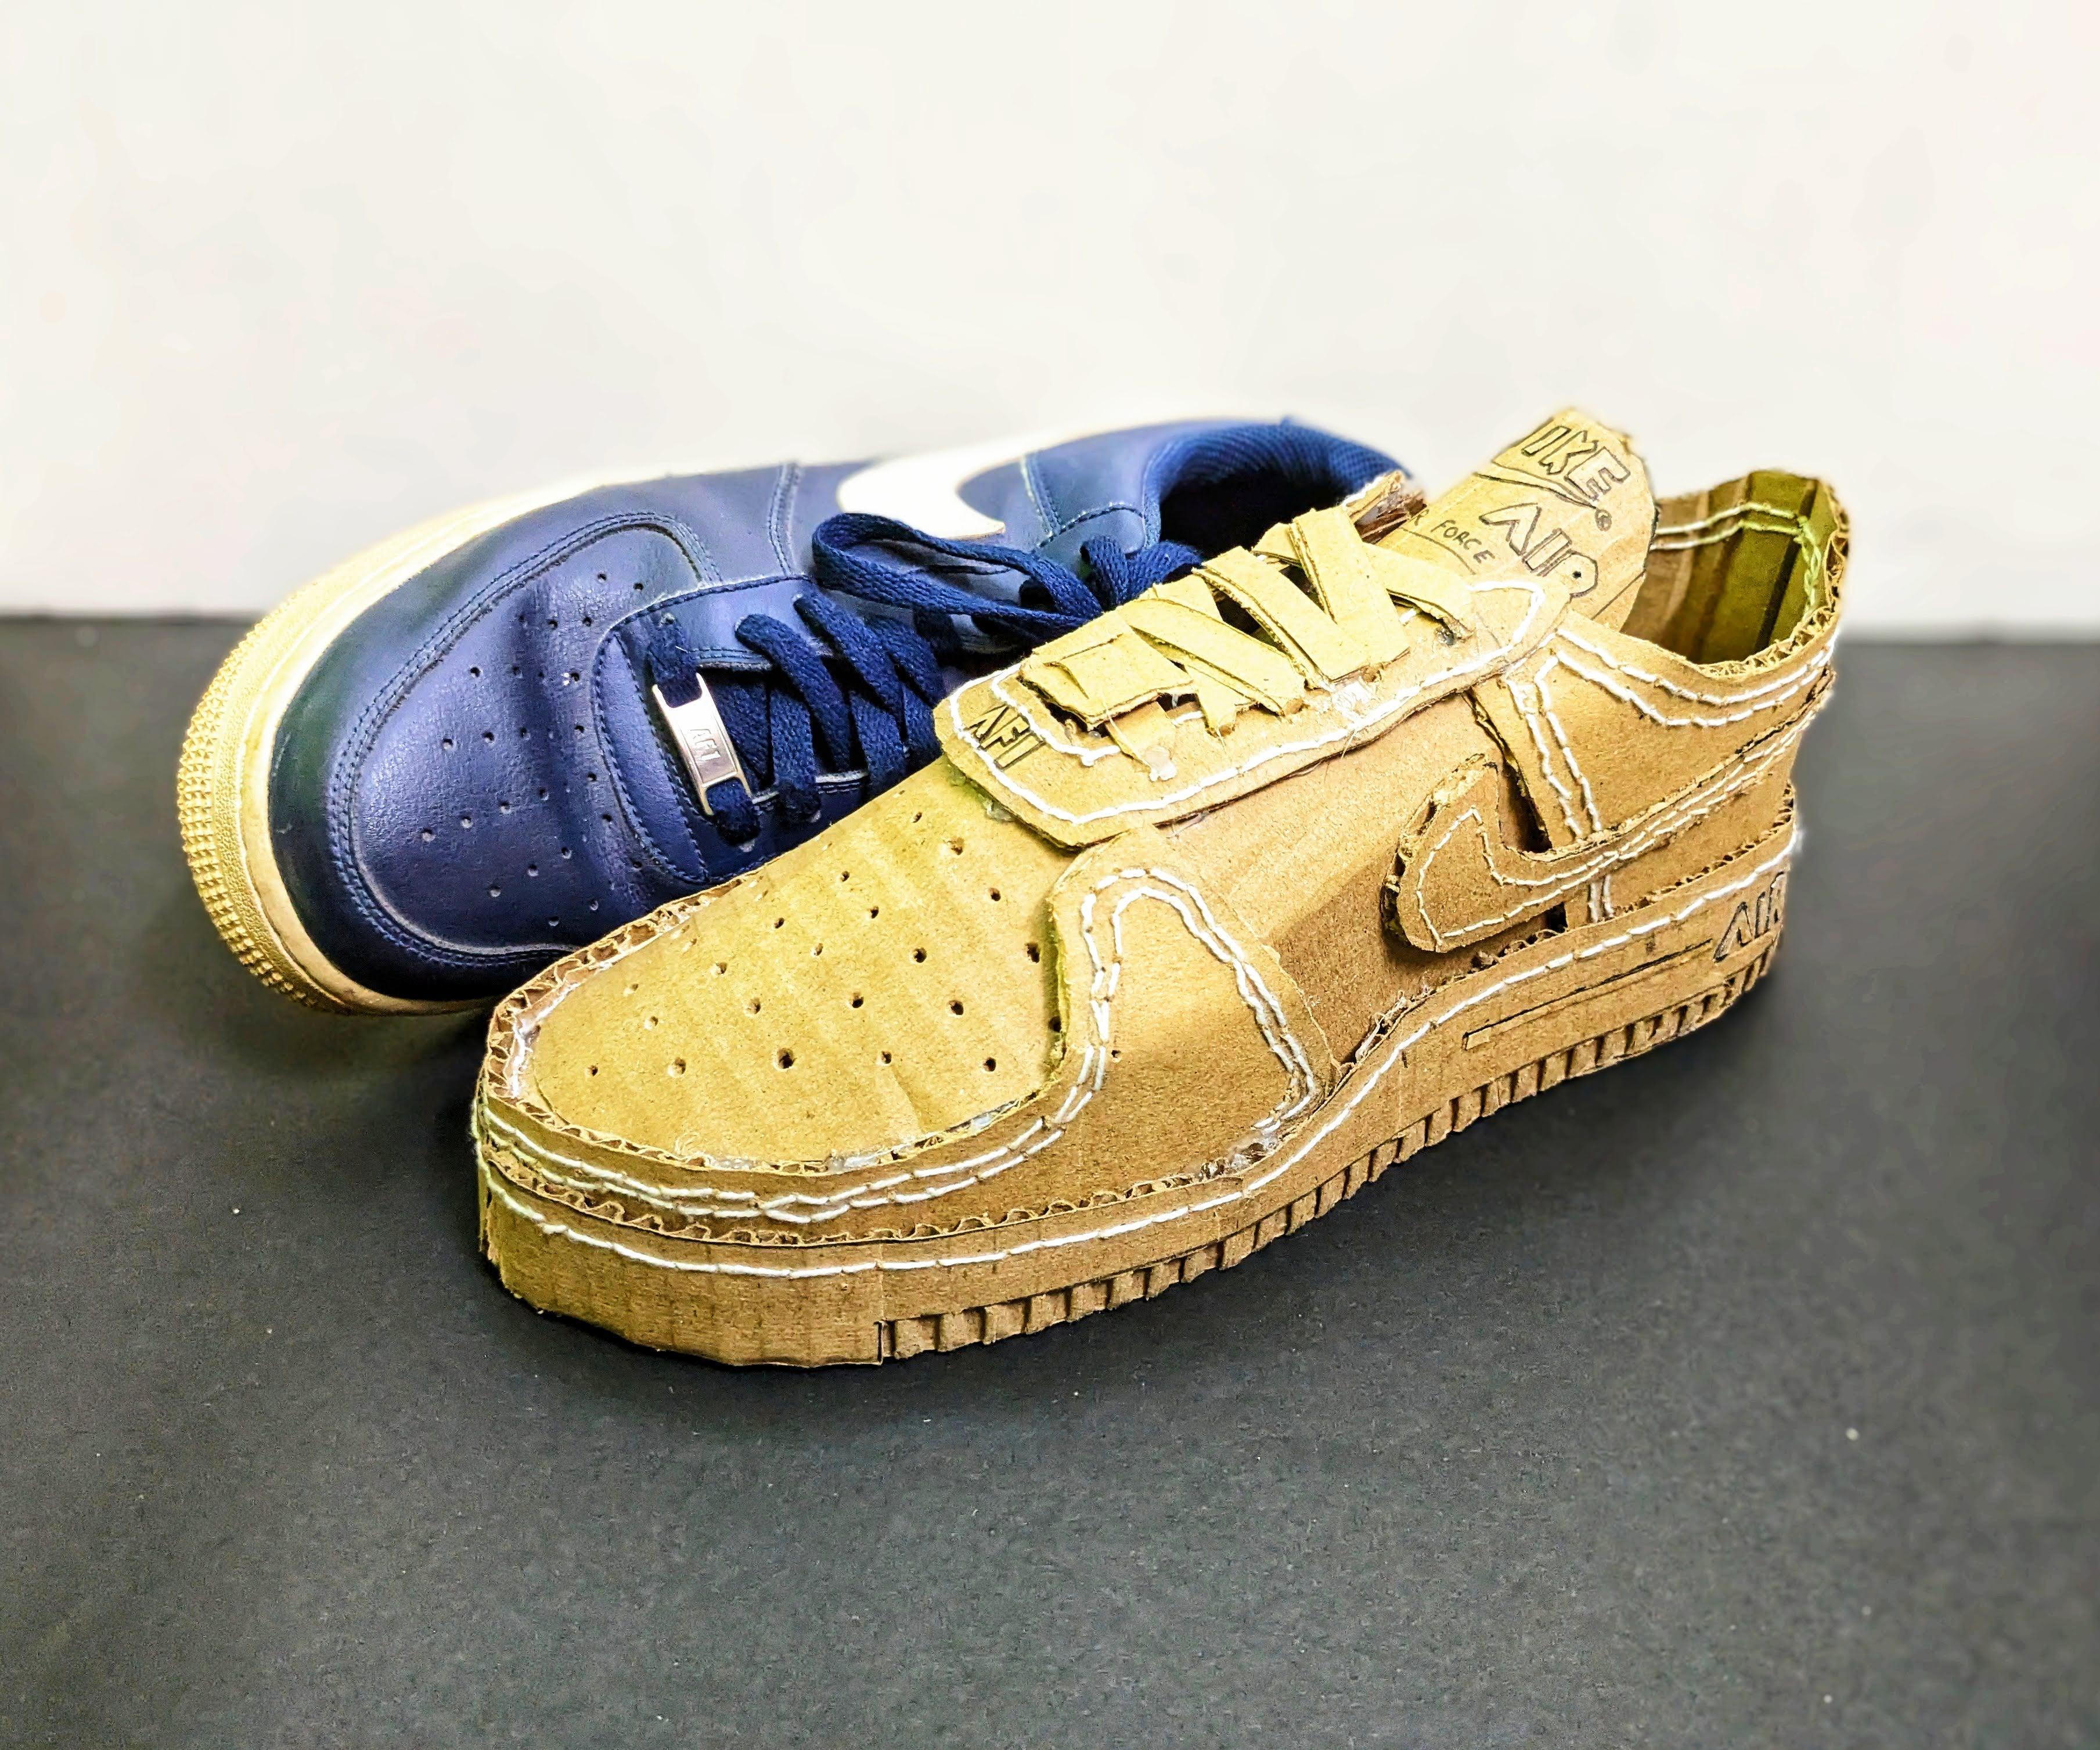 Create Your Own Nike Air Force 1 Using Recycled Cardboard Boxes ( Cocoa Version)